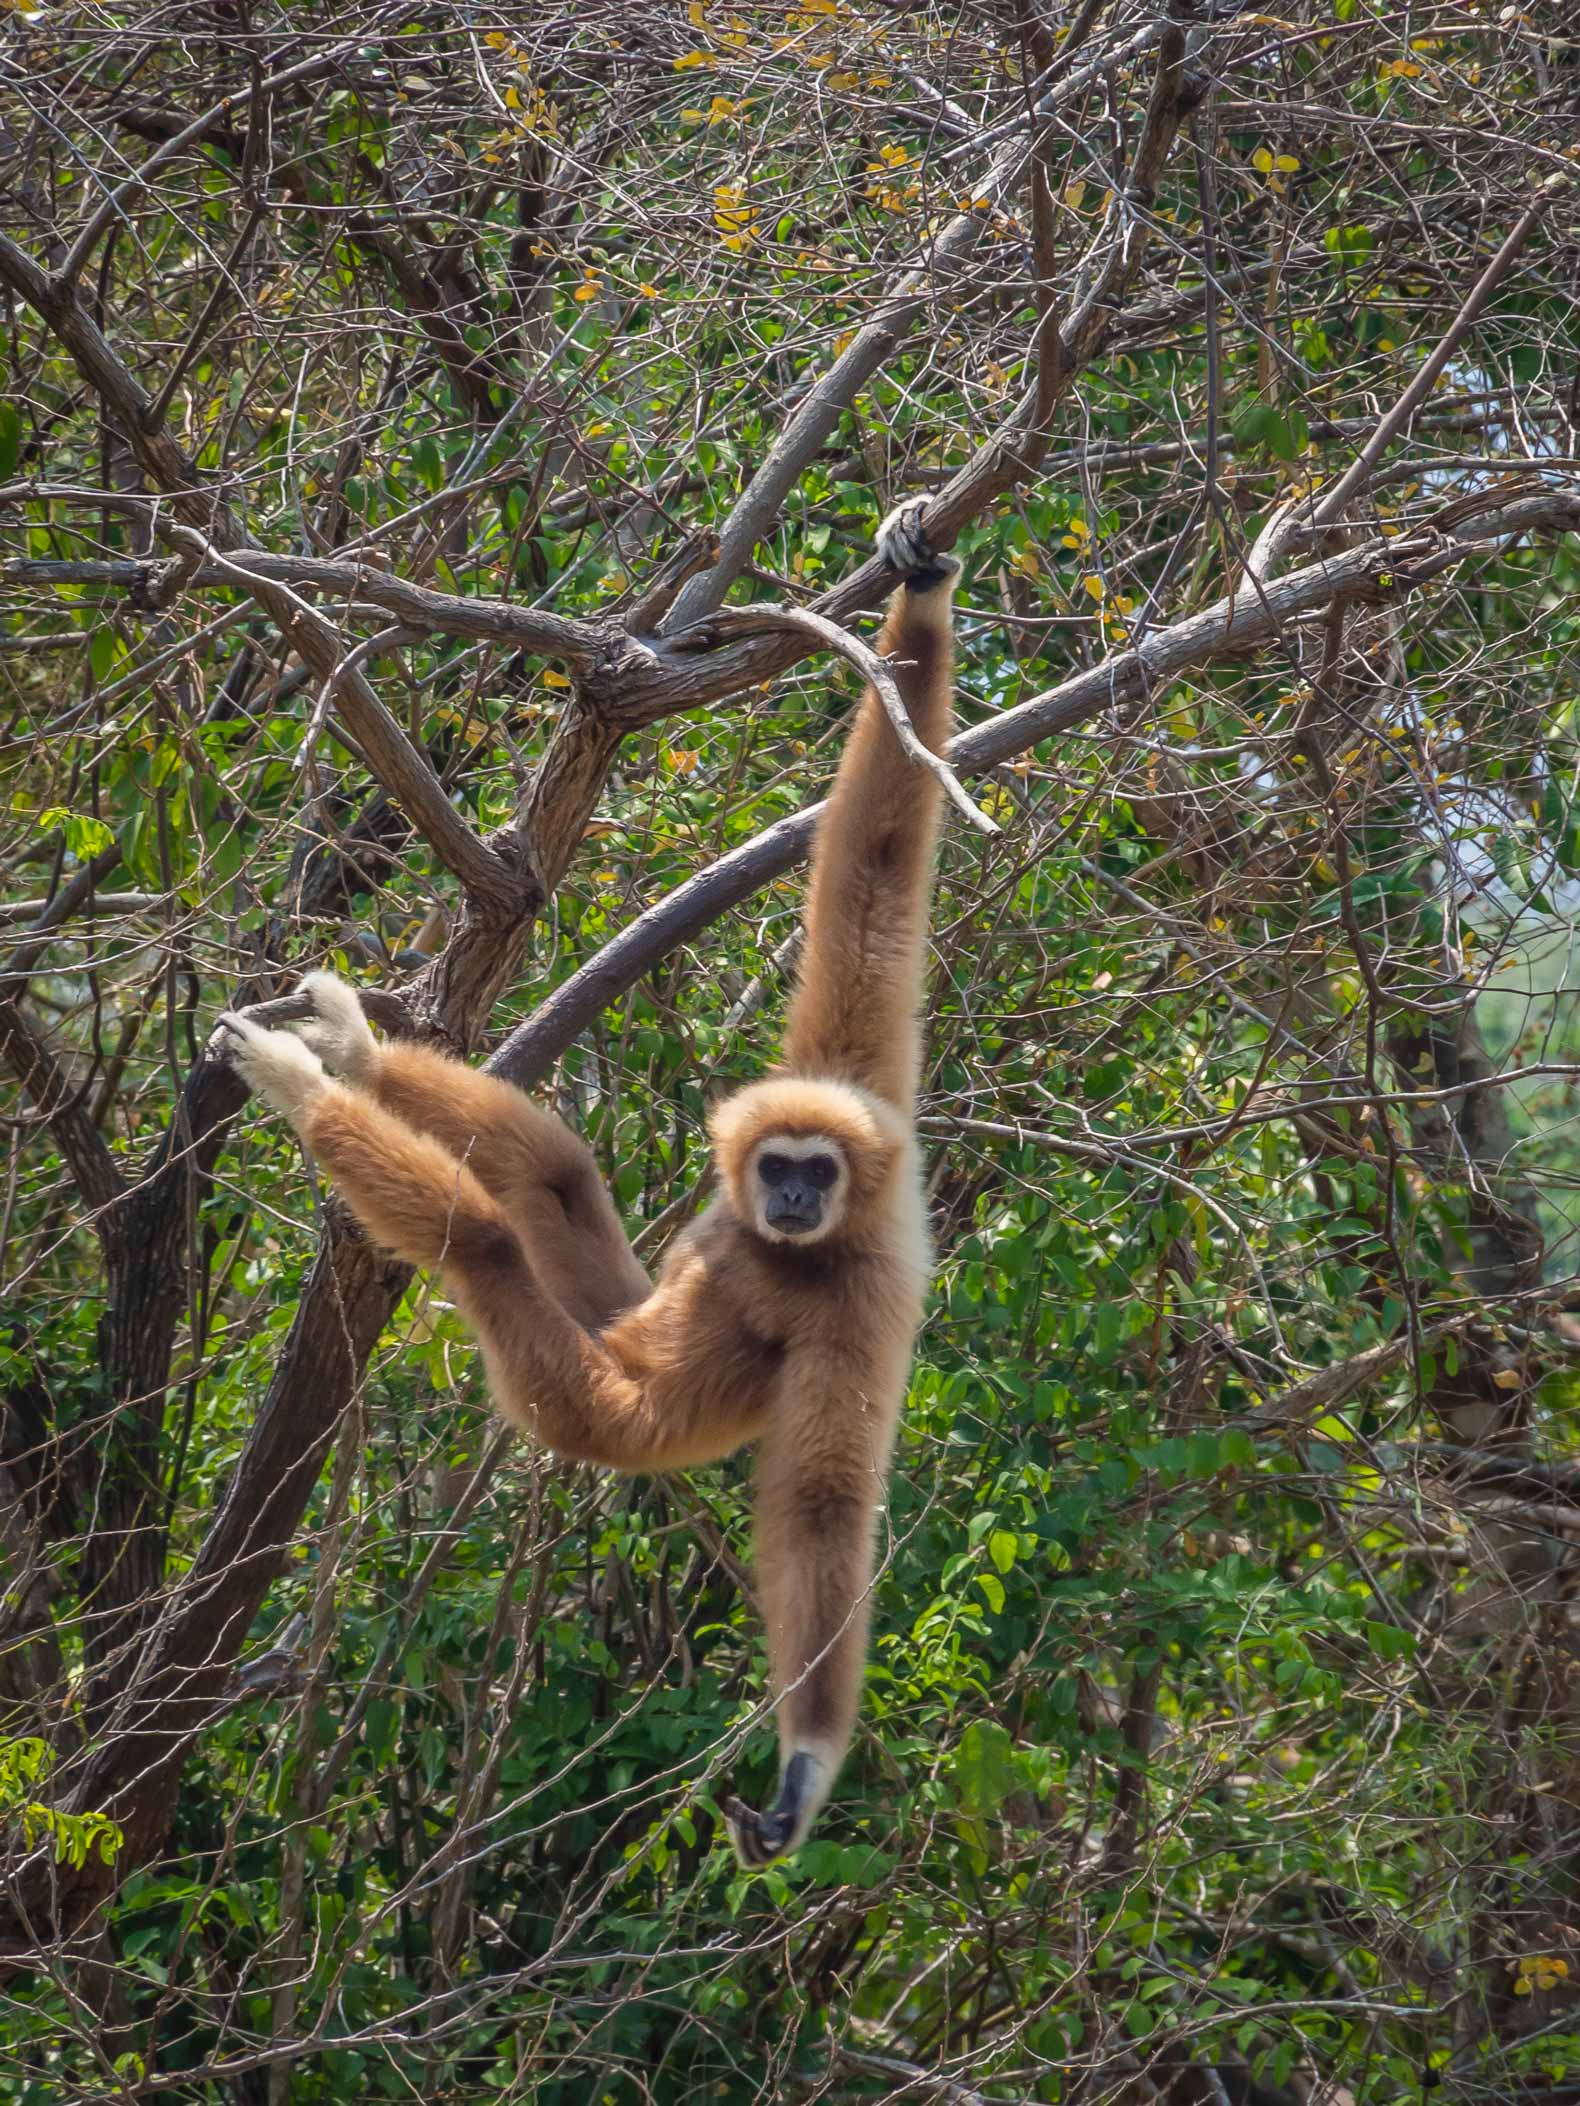 A Gibbon in a tree